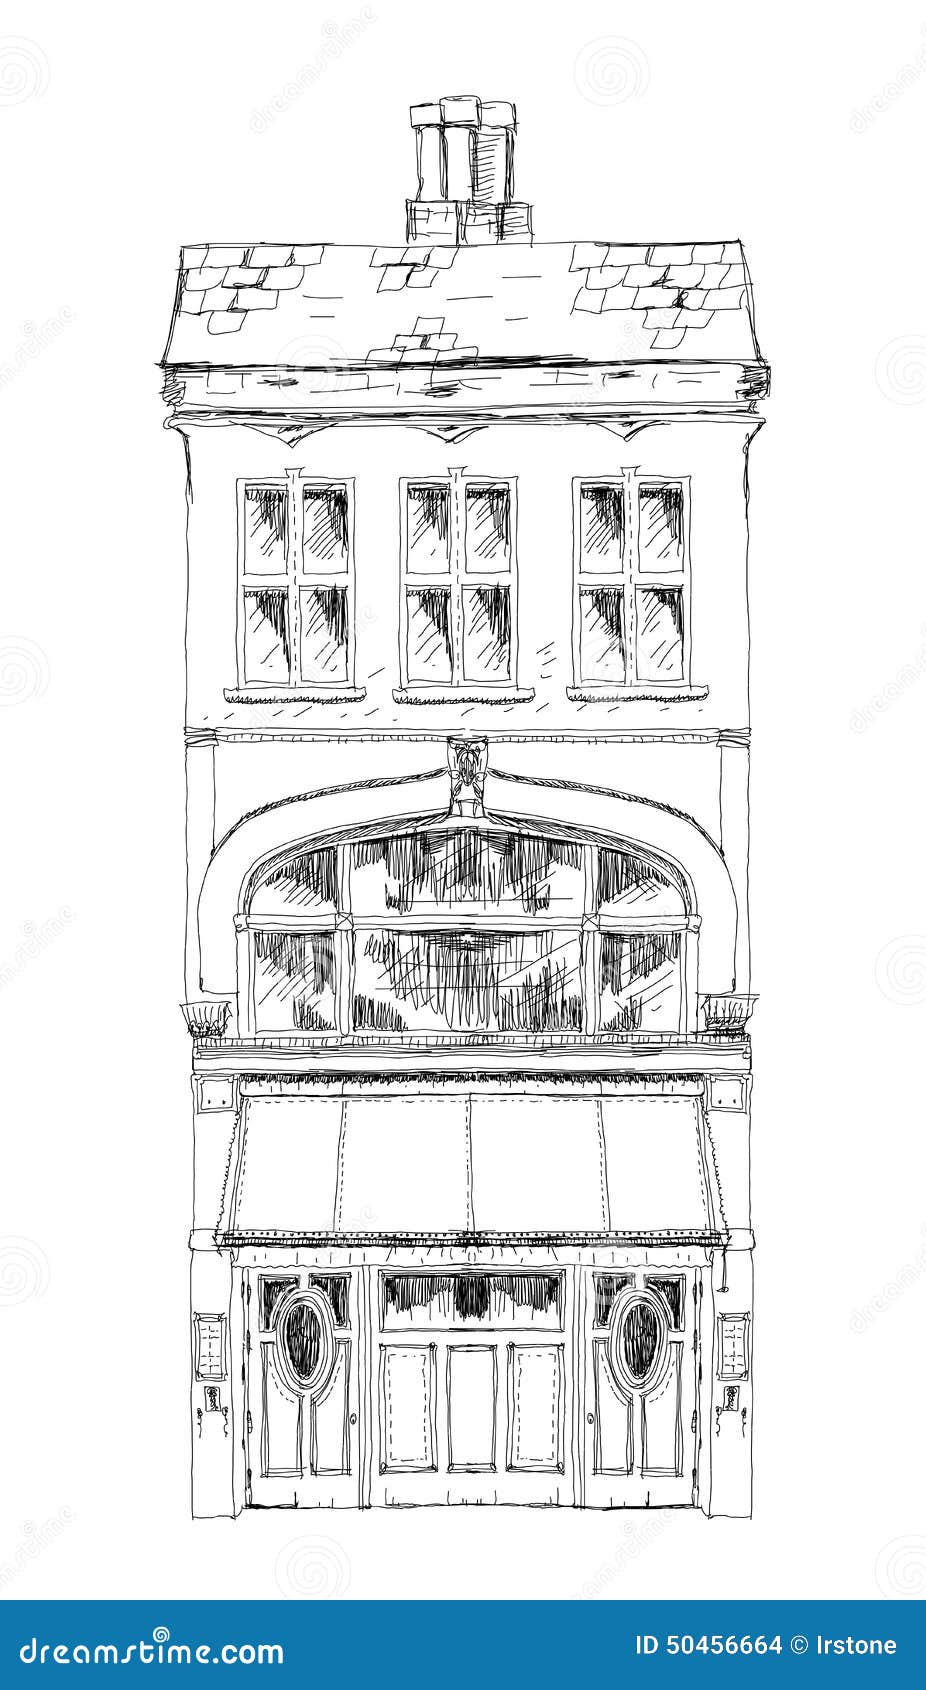 old english town house with small shop or business on ground floor. bond street, london. sketch